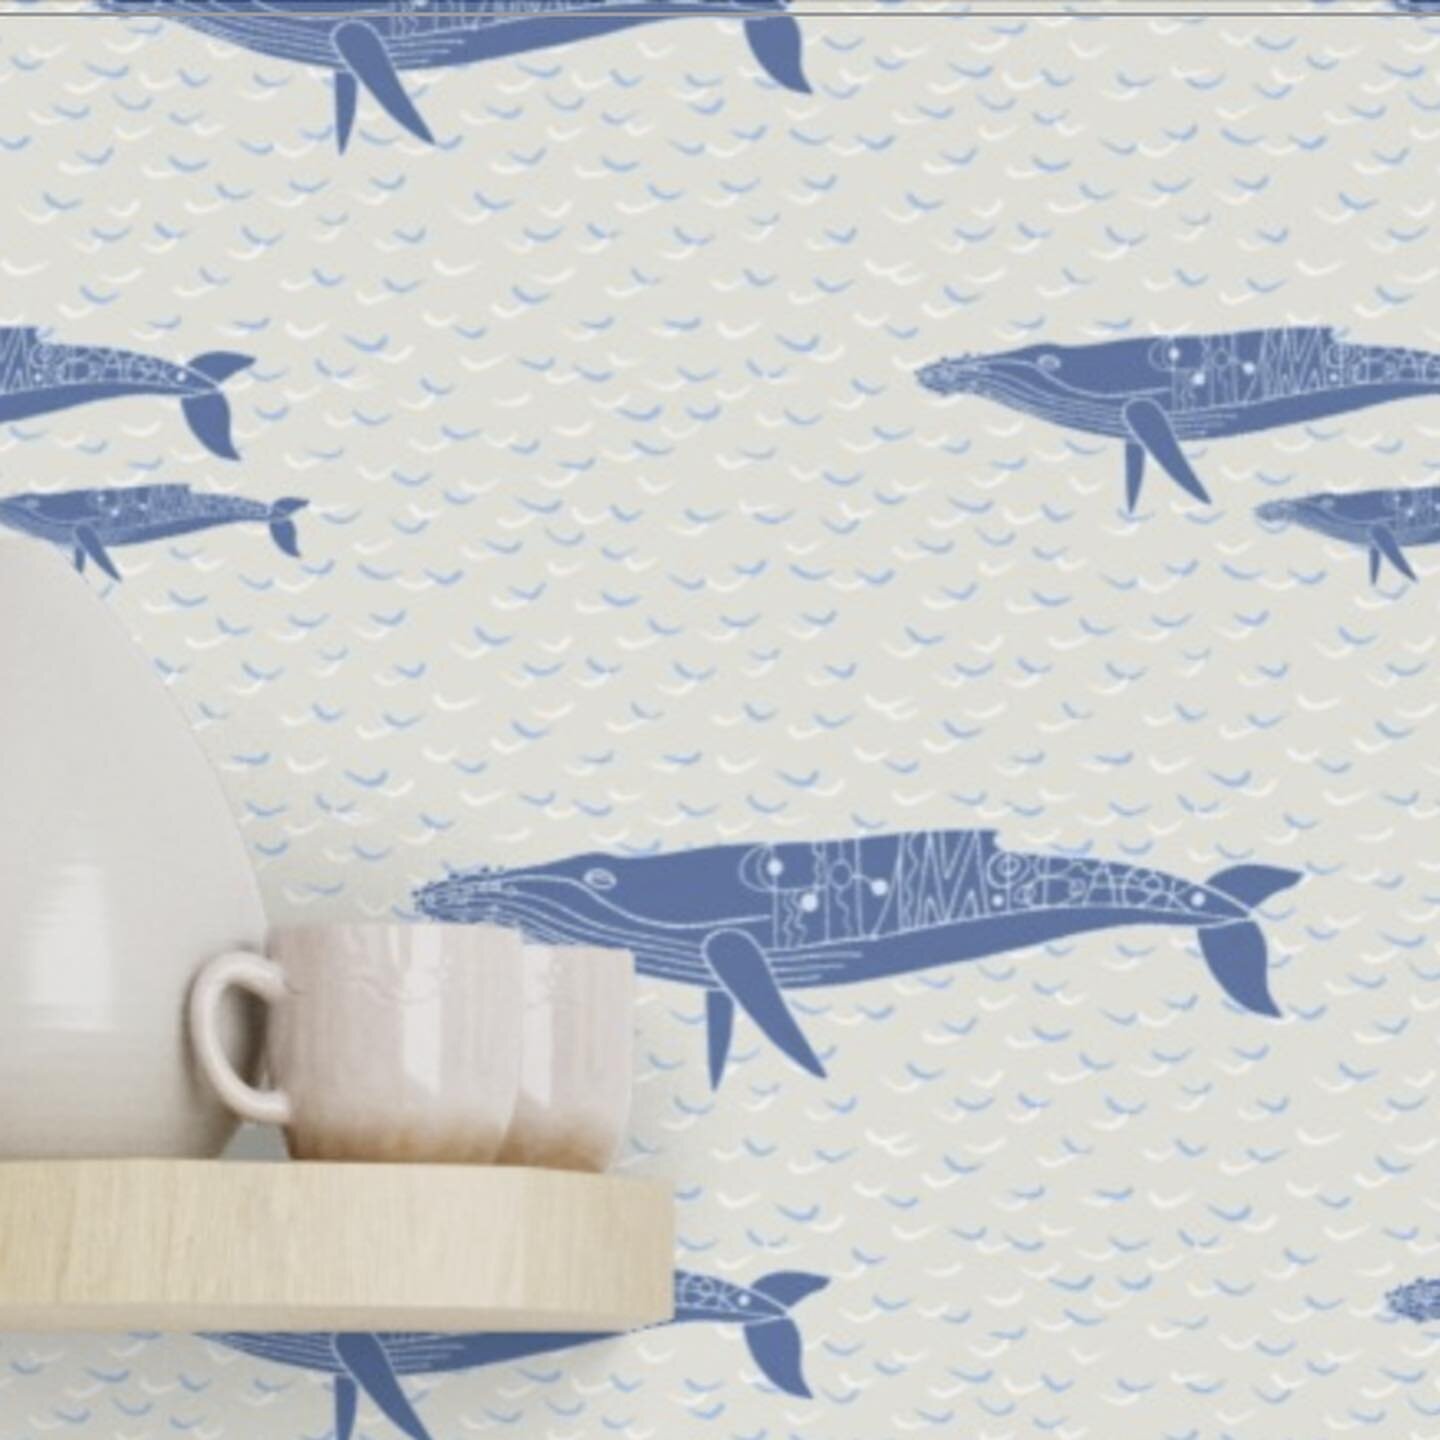 inkmo wallpaper in sand whales migrating and navy dolphins. Available in 4 types of wallpaper including Grasscloth and currently up to 25% off @spoonflower/inkmo Link to my shop in bio